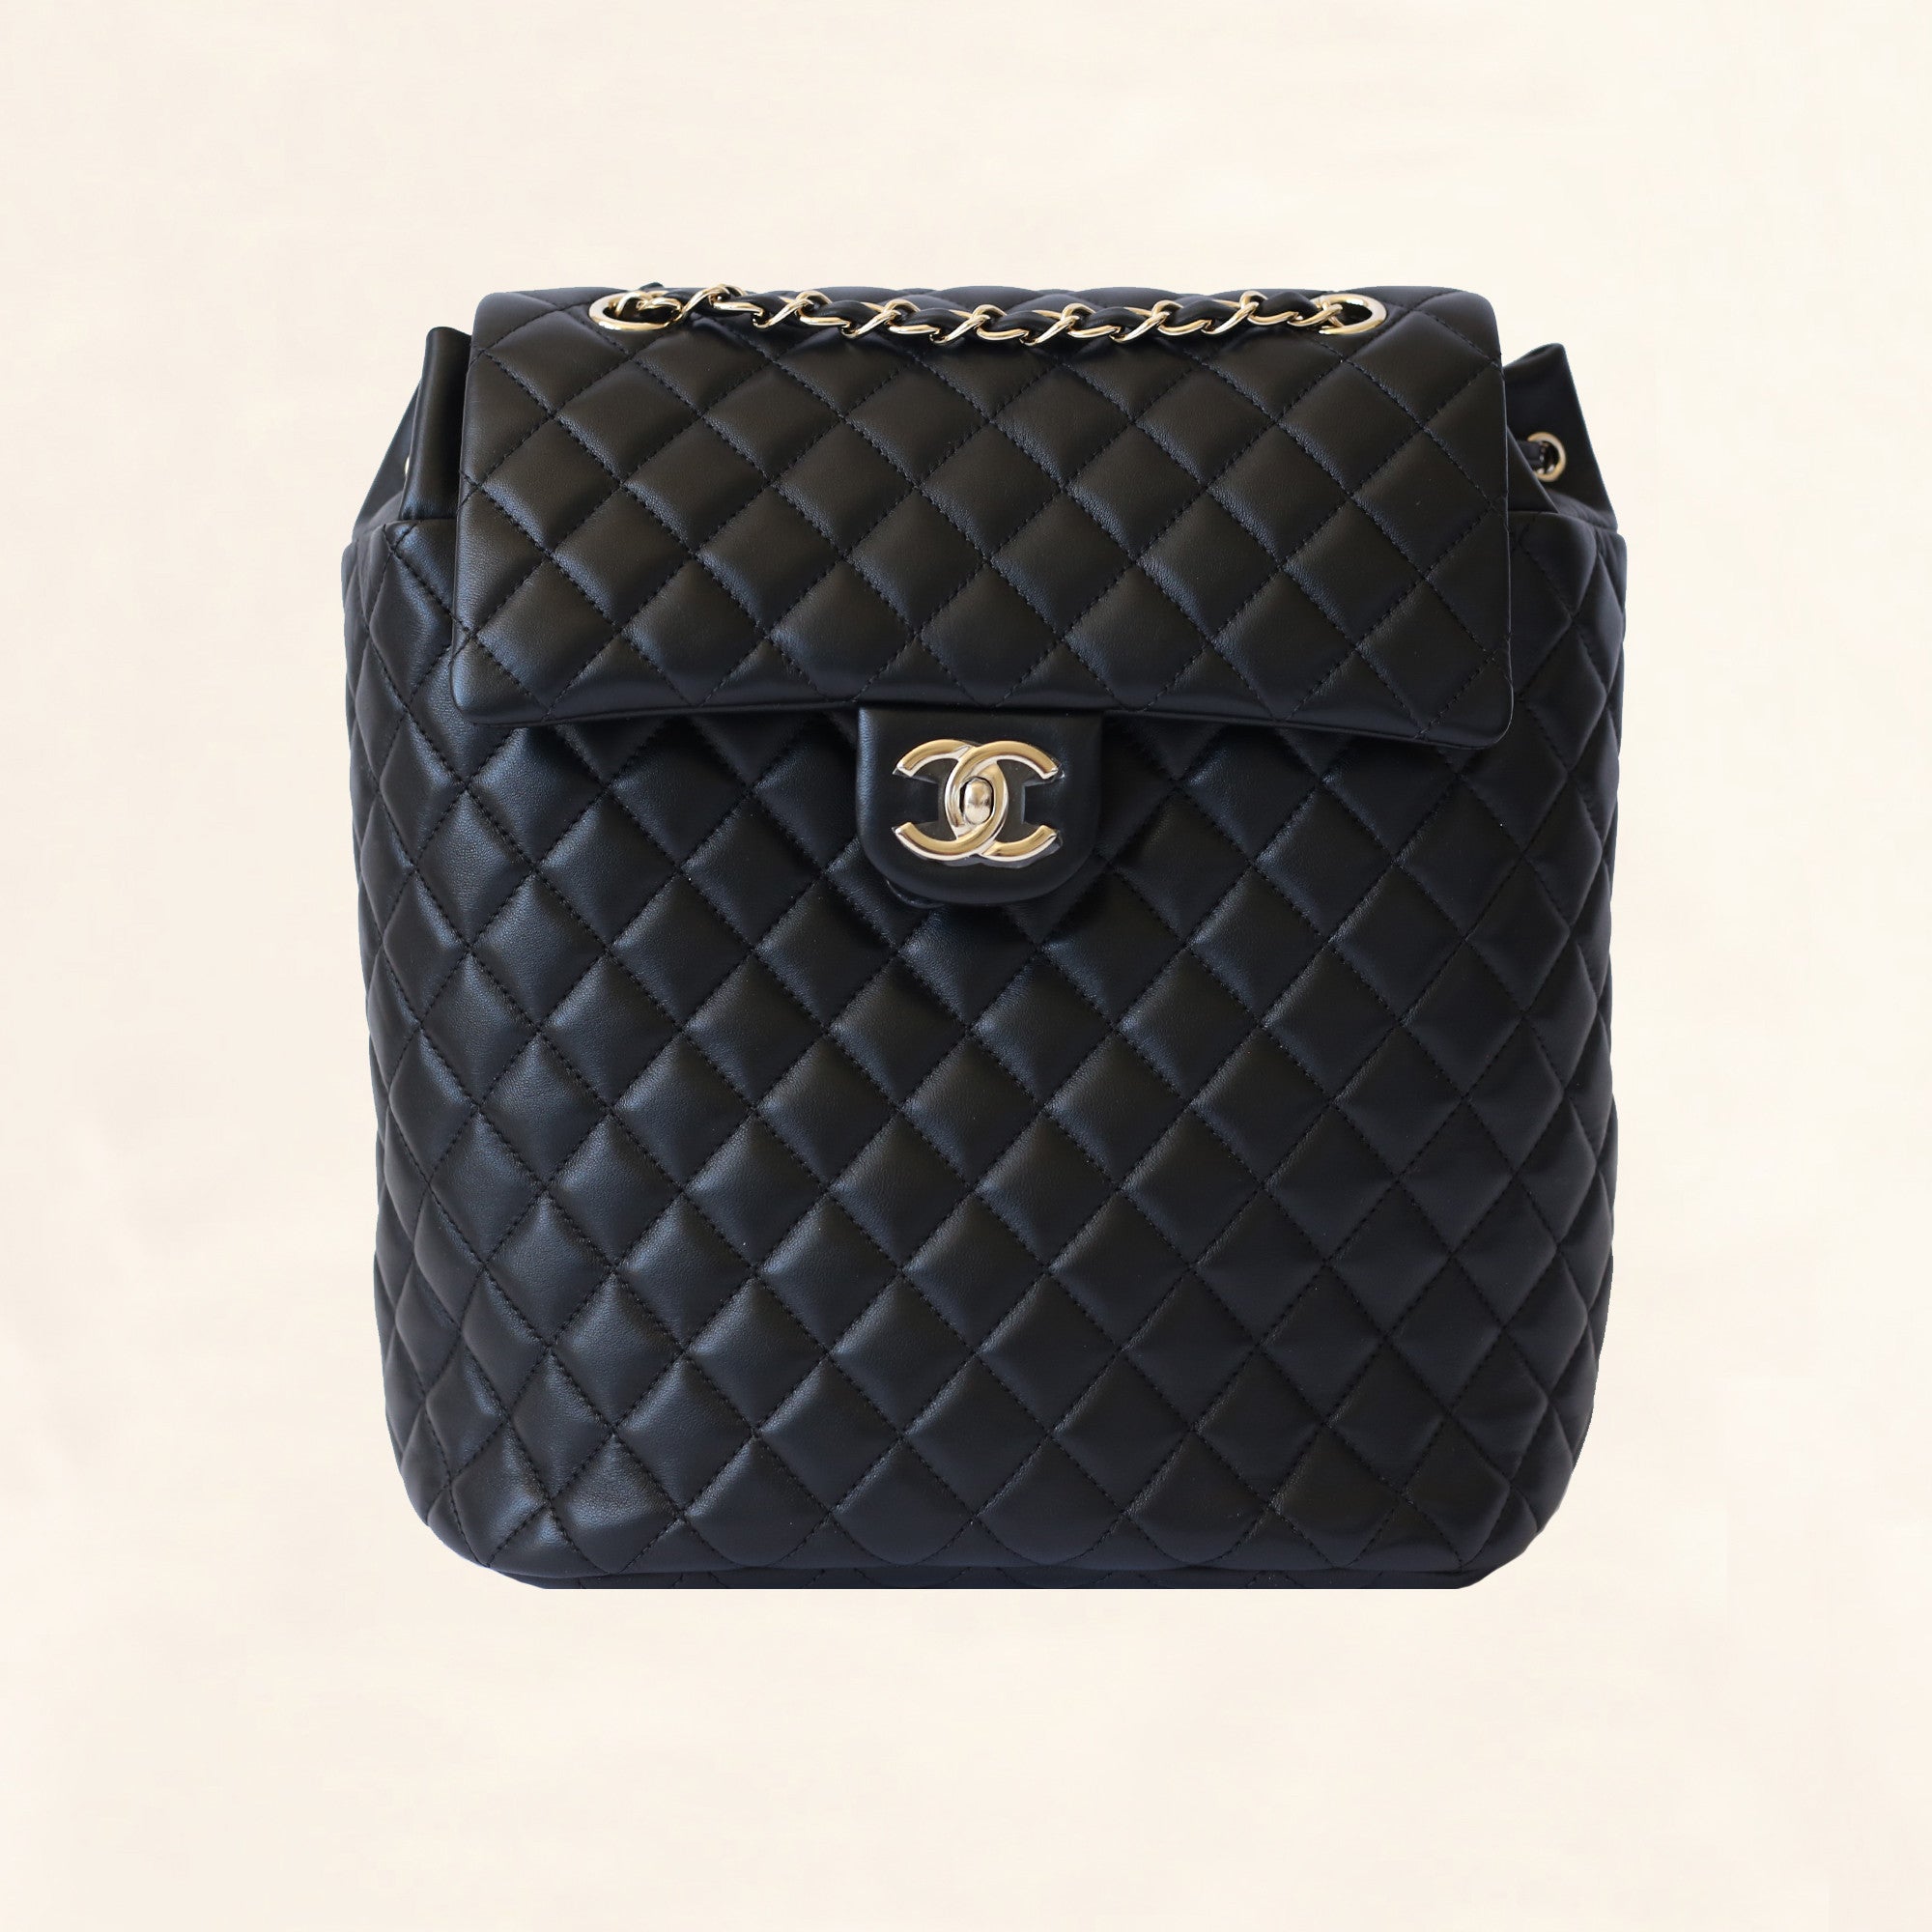 Chanel Metallic Gold Quilted Calfskin Small Gabrielle Backpack  myGemma   CH  Item 123033